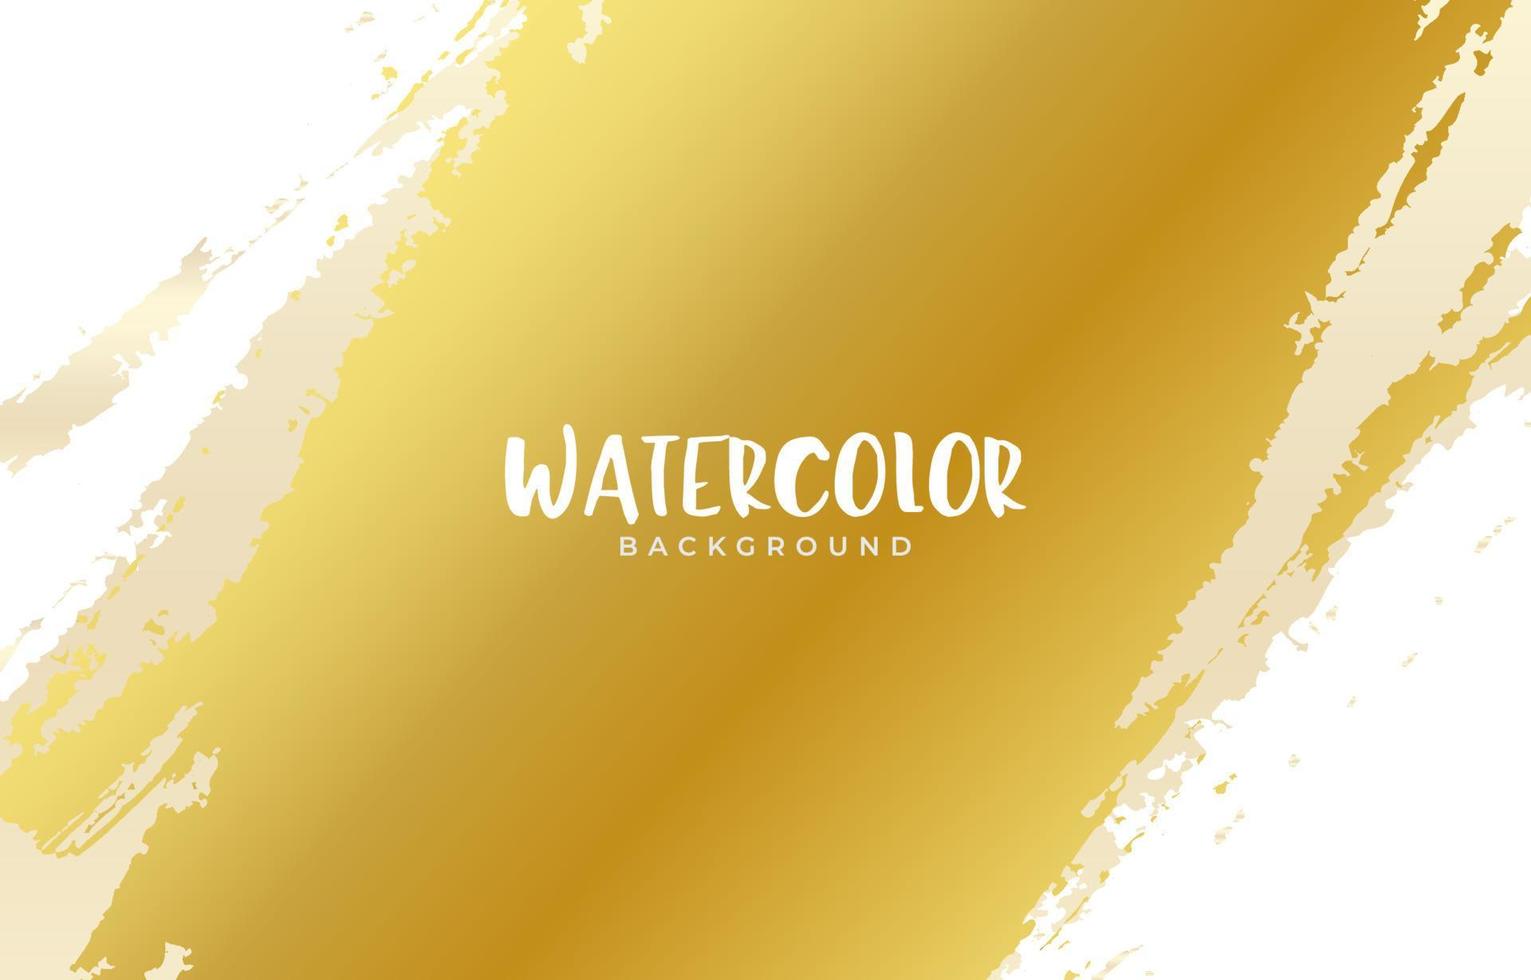 nice golden watercolor background design with text space vector